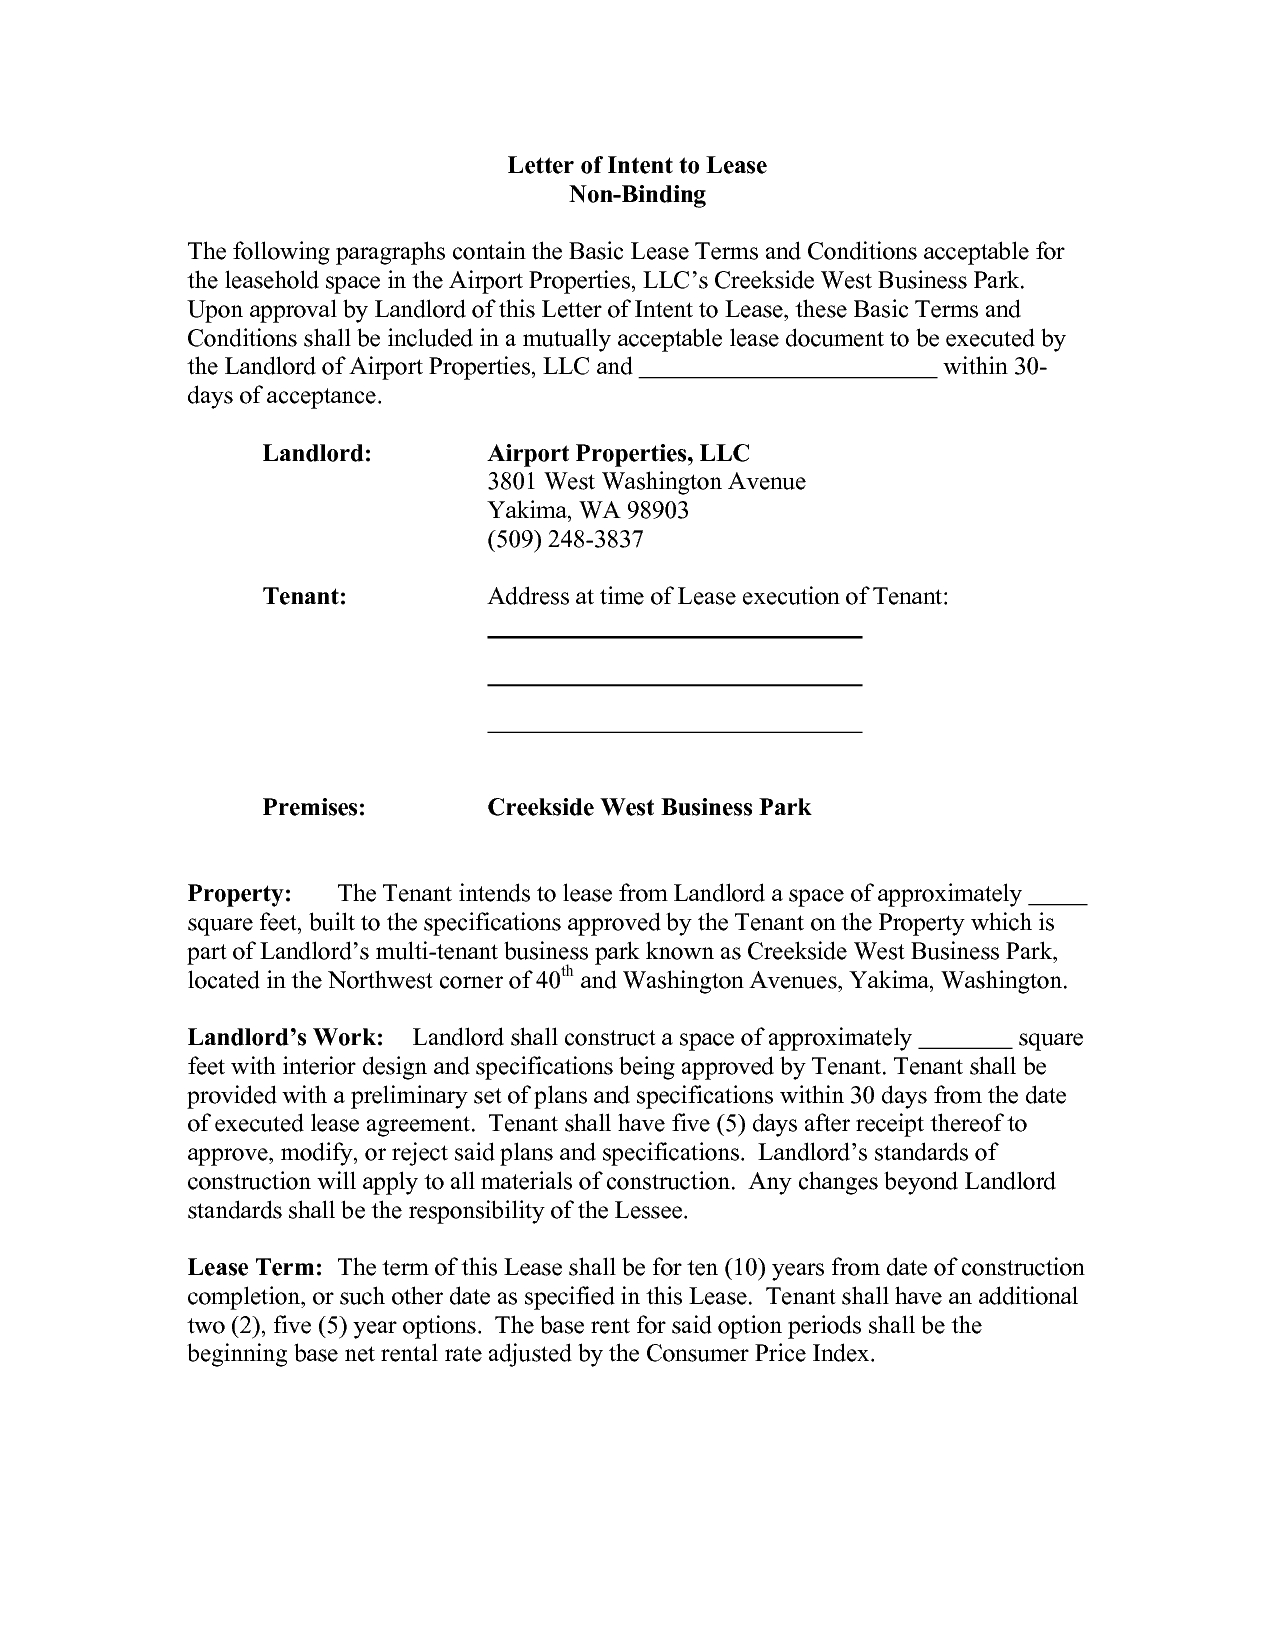 commercial-real-estate-lease-letter-of-intent-template-examples